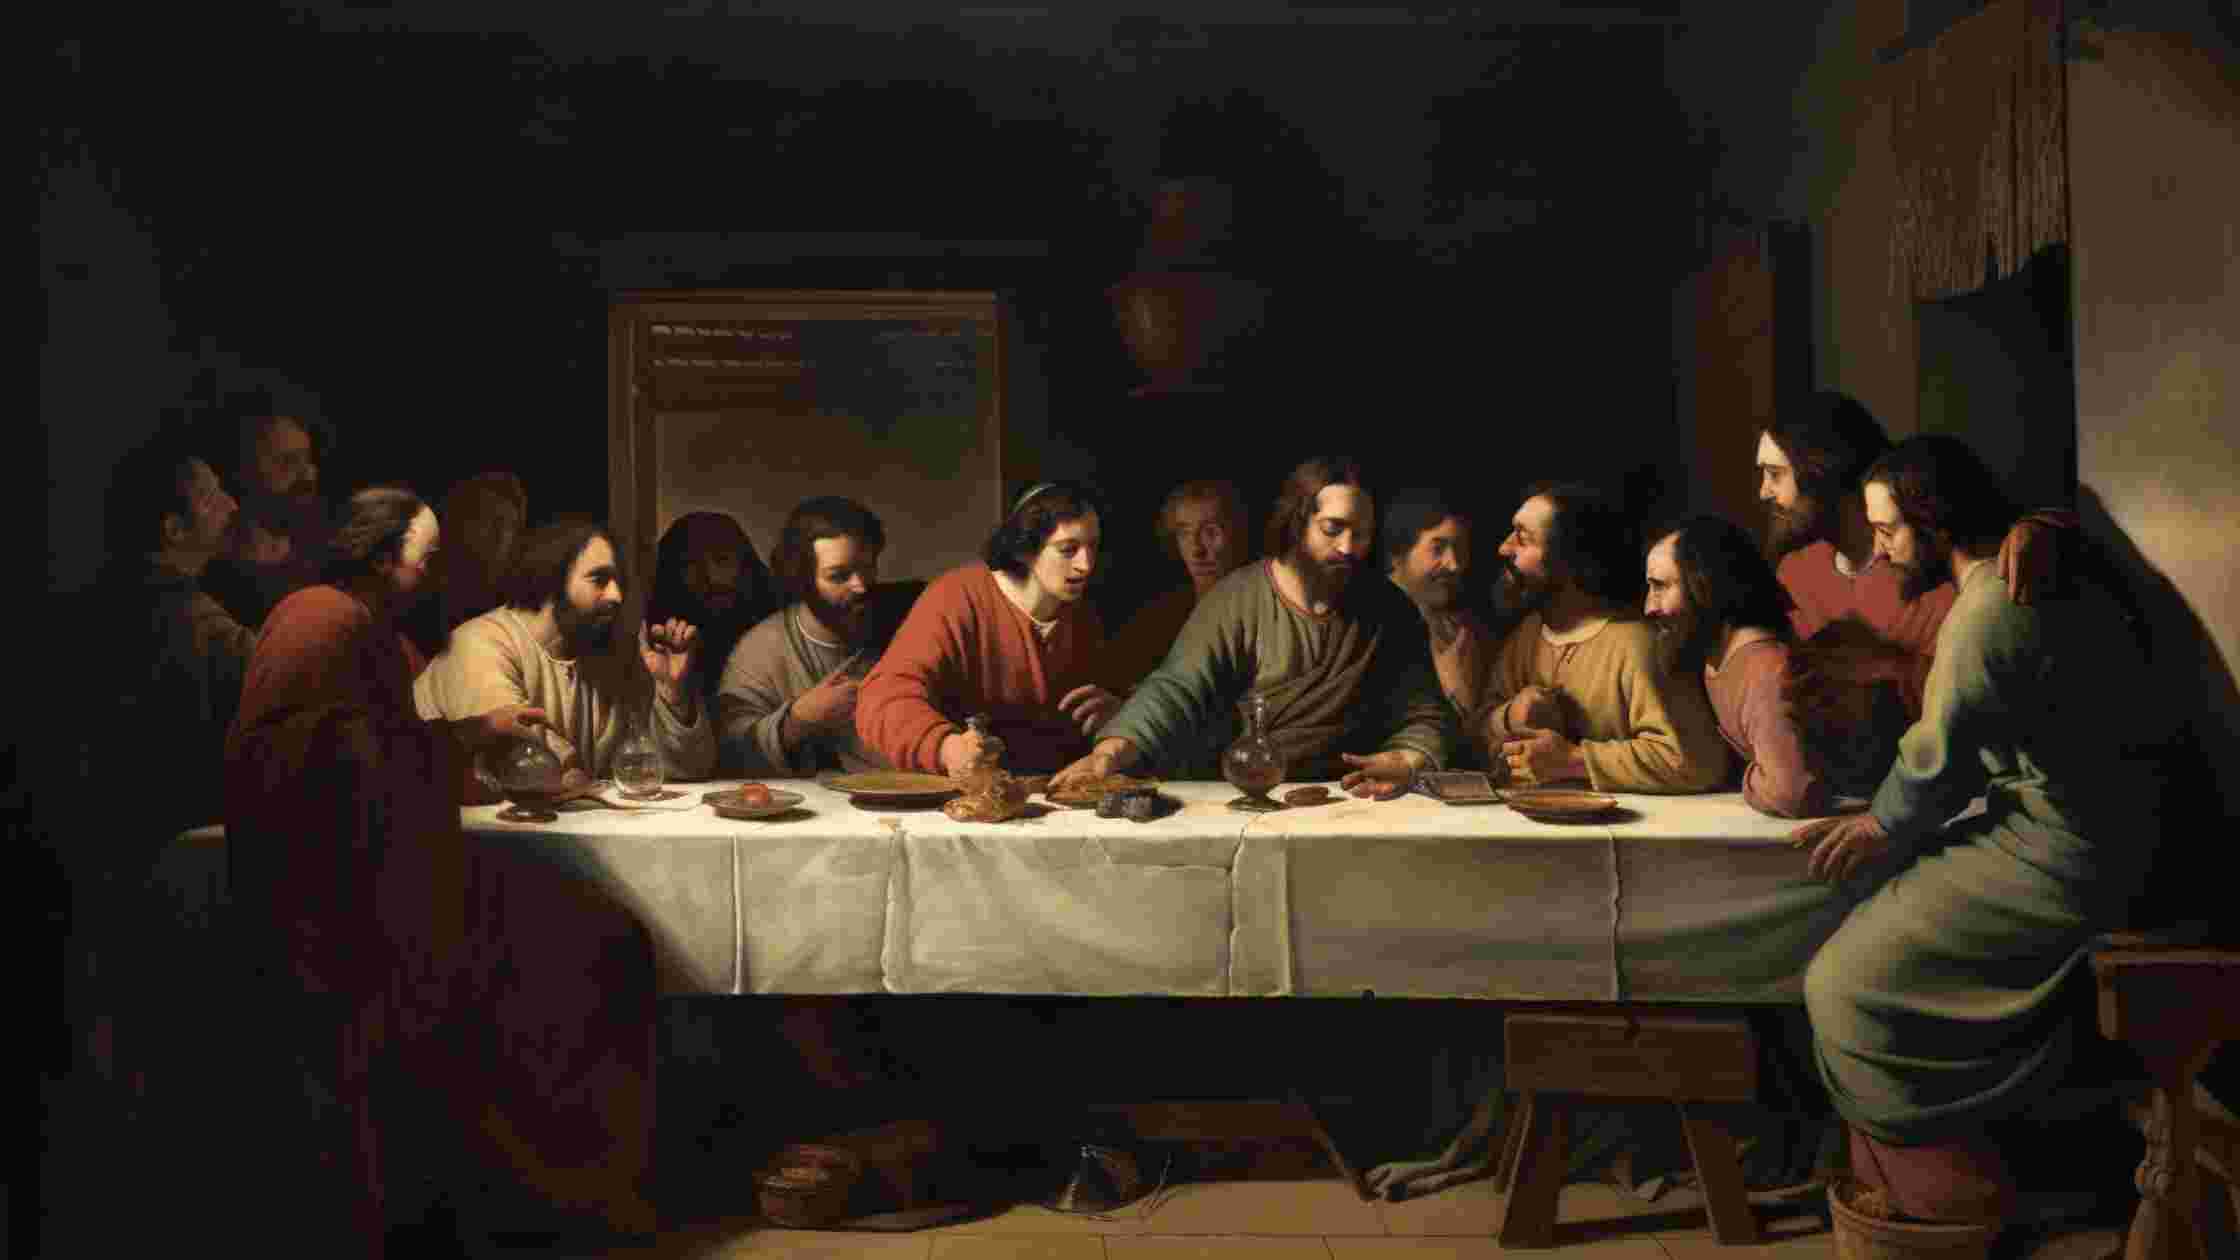 Why didn’t Jesus include any women among his twelve disciples?